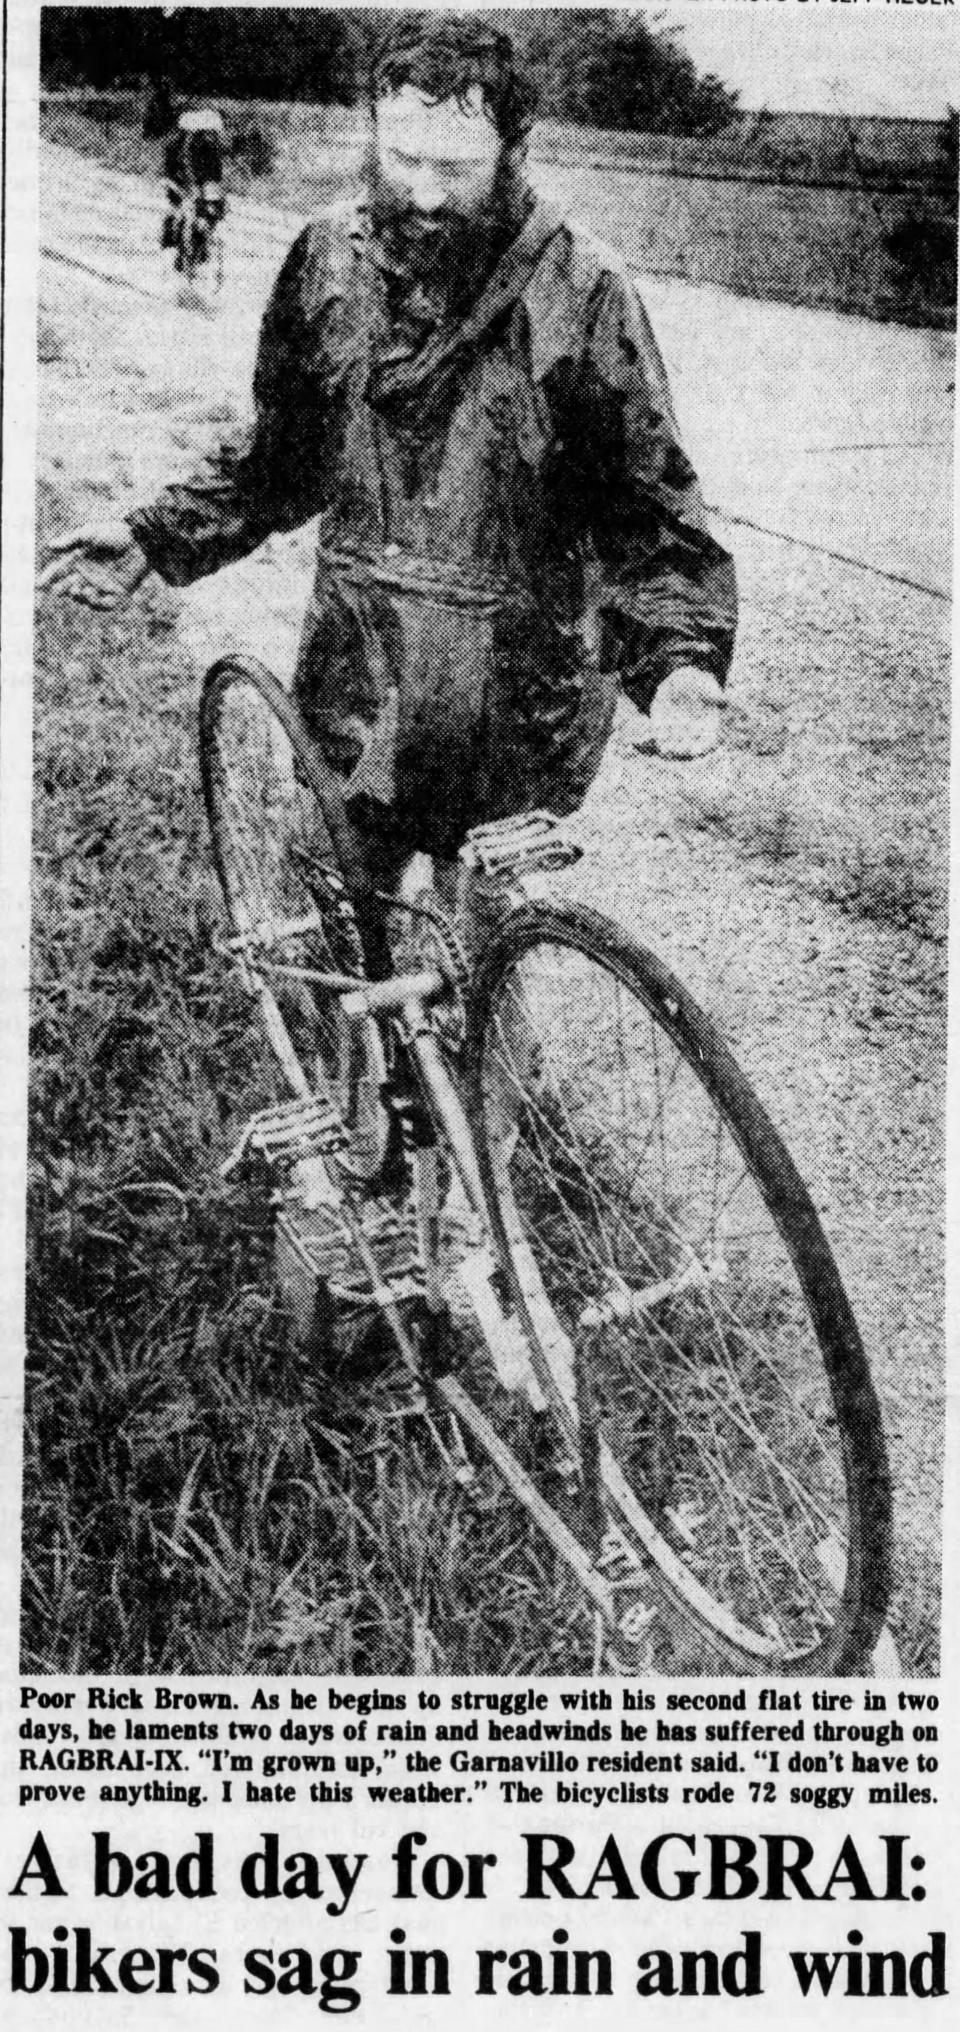 Rick Brown struggles with his second flat tire on "Soggy Monday," on July 27, 1981. Temperatures never rose above 50 degrees and riders were hit by rain and stiff headwinds.